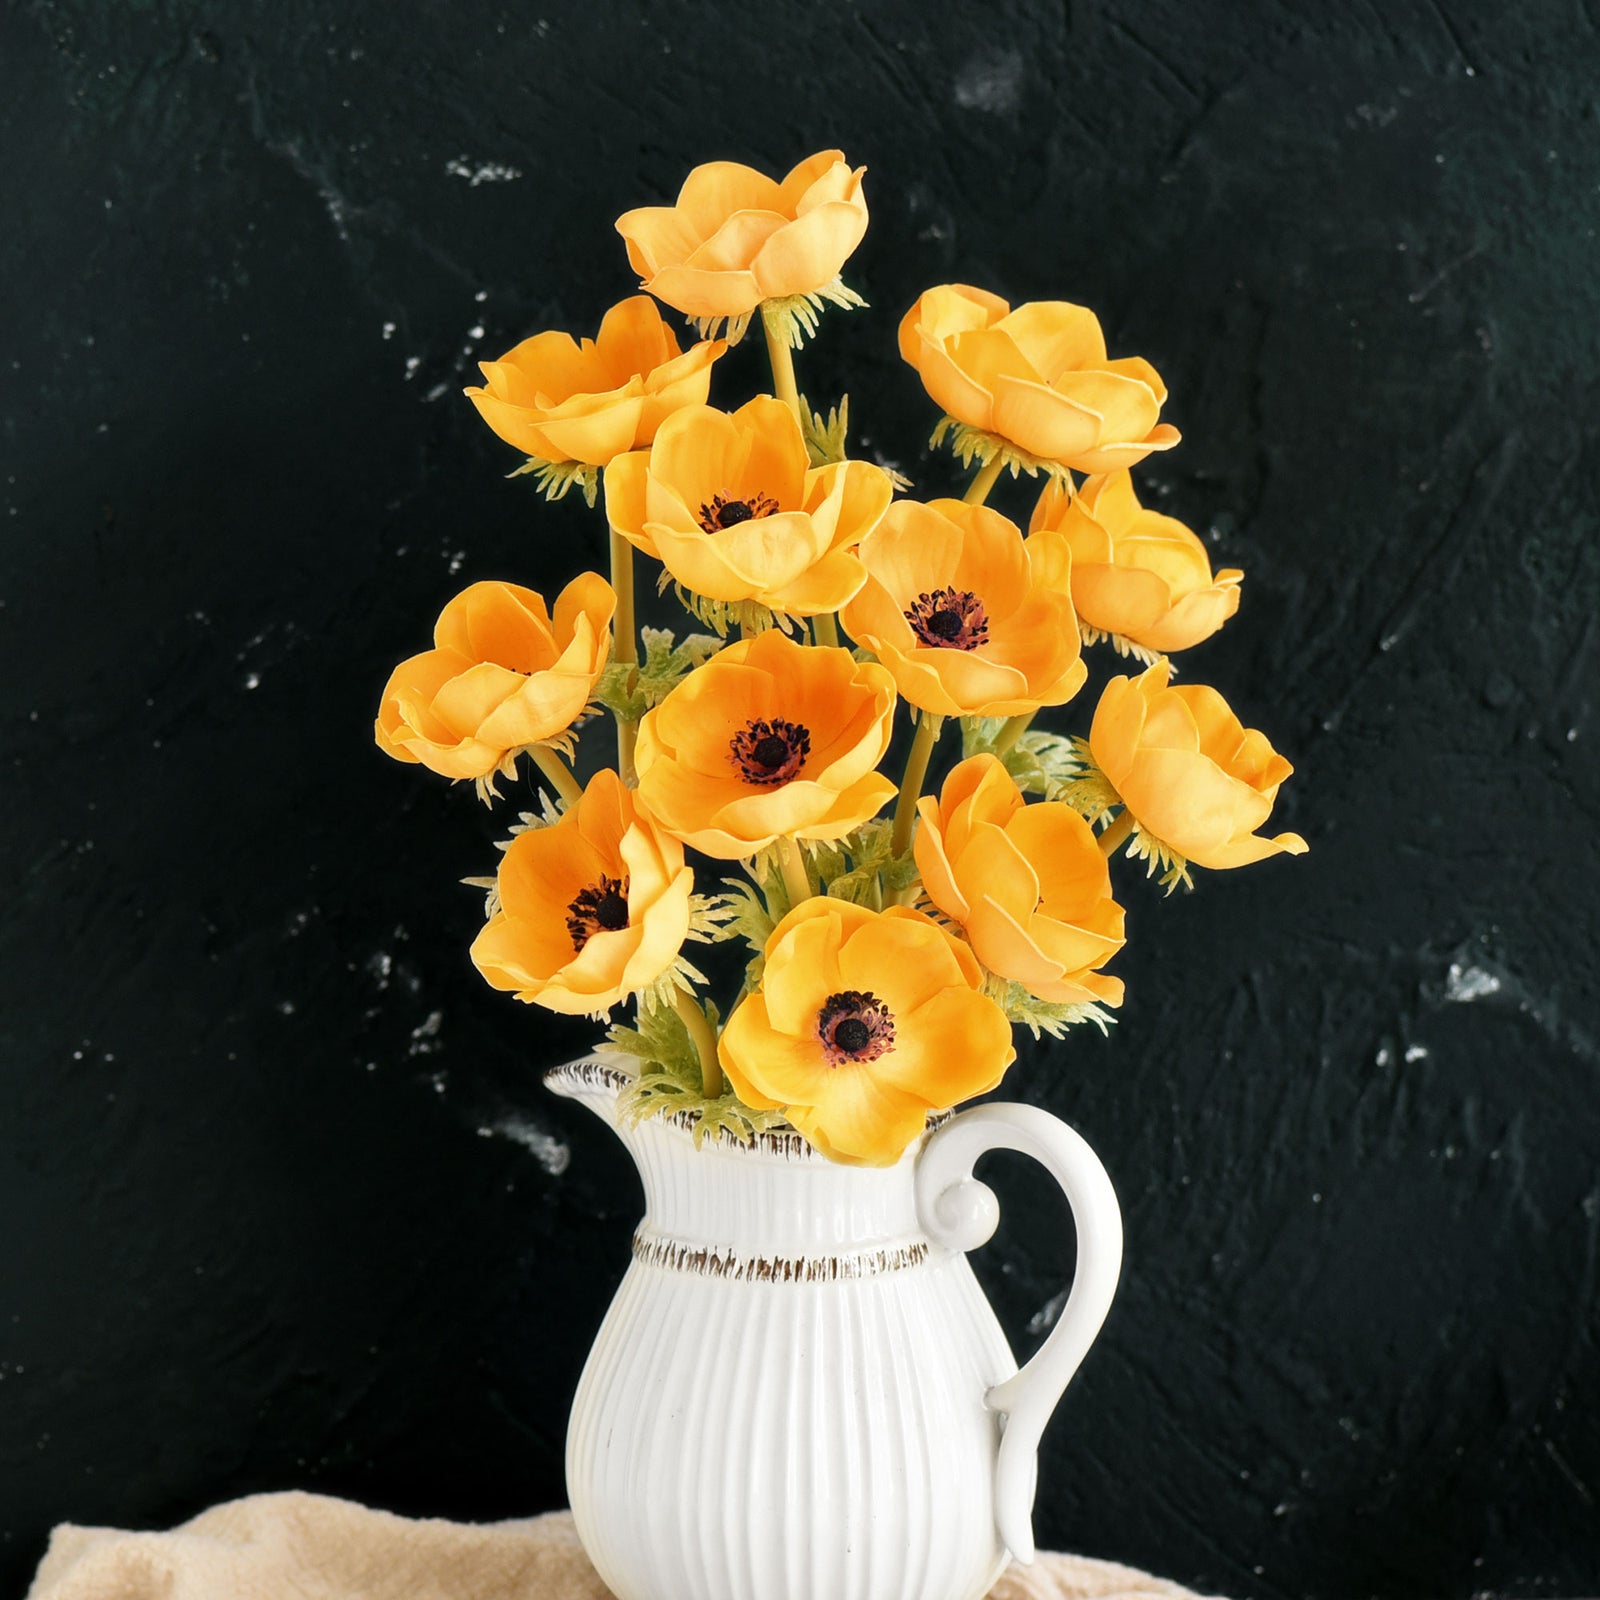 12 Long Stems of ‘Real Touch’ Artificial (Orange) Anemone Flowers, Wedding Bouquet Flower Arrangement, 45cm (17.7 inches)